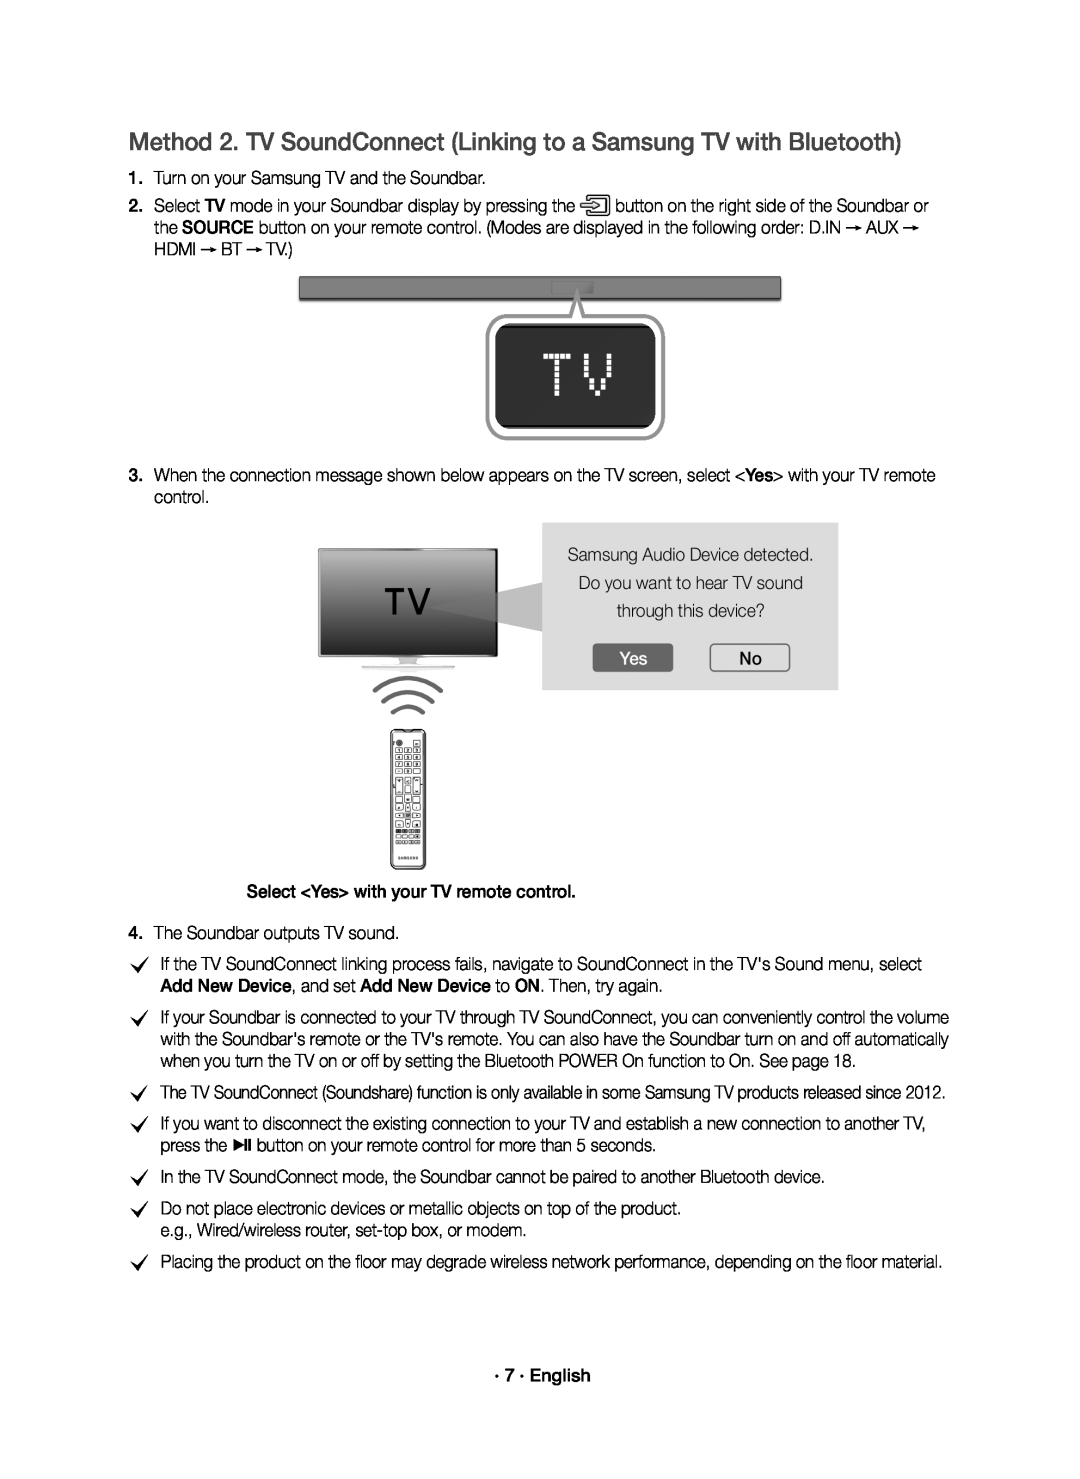 Samsung HW-K650/ZF, HW-K651/ZF manual Method 2. TV SoundConnect Linking to a Samsung TV with Bluetooth, YesNo 